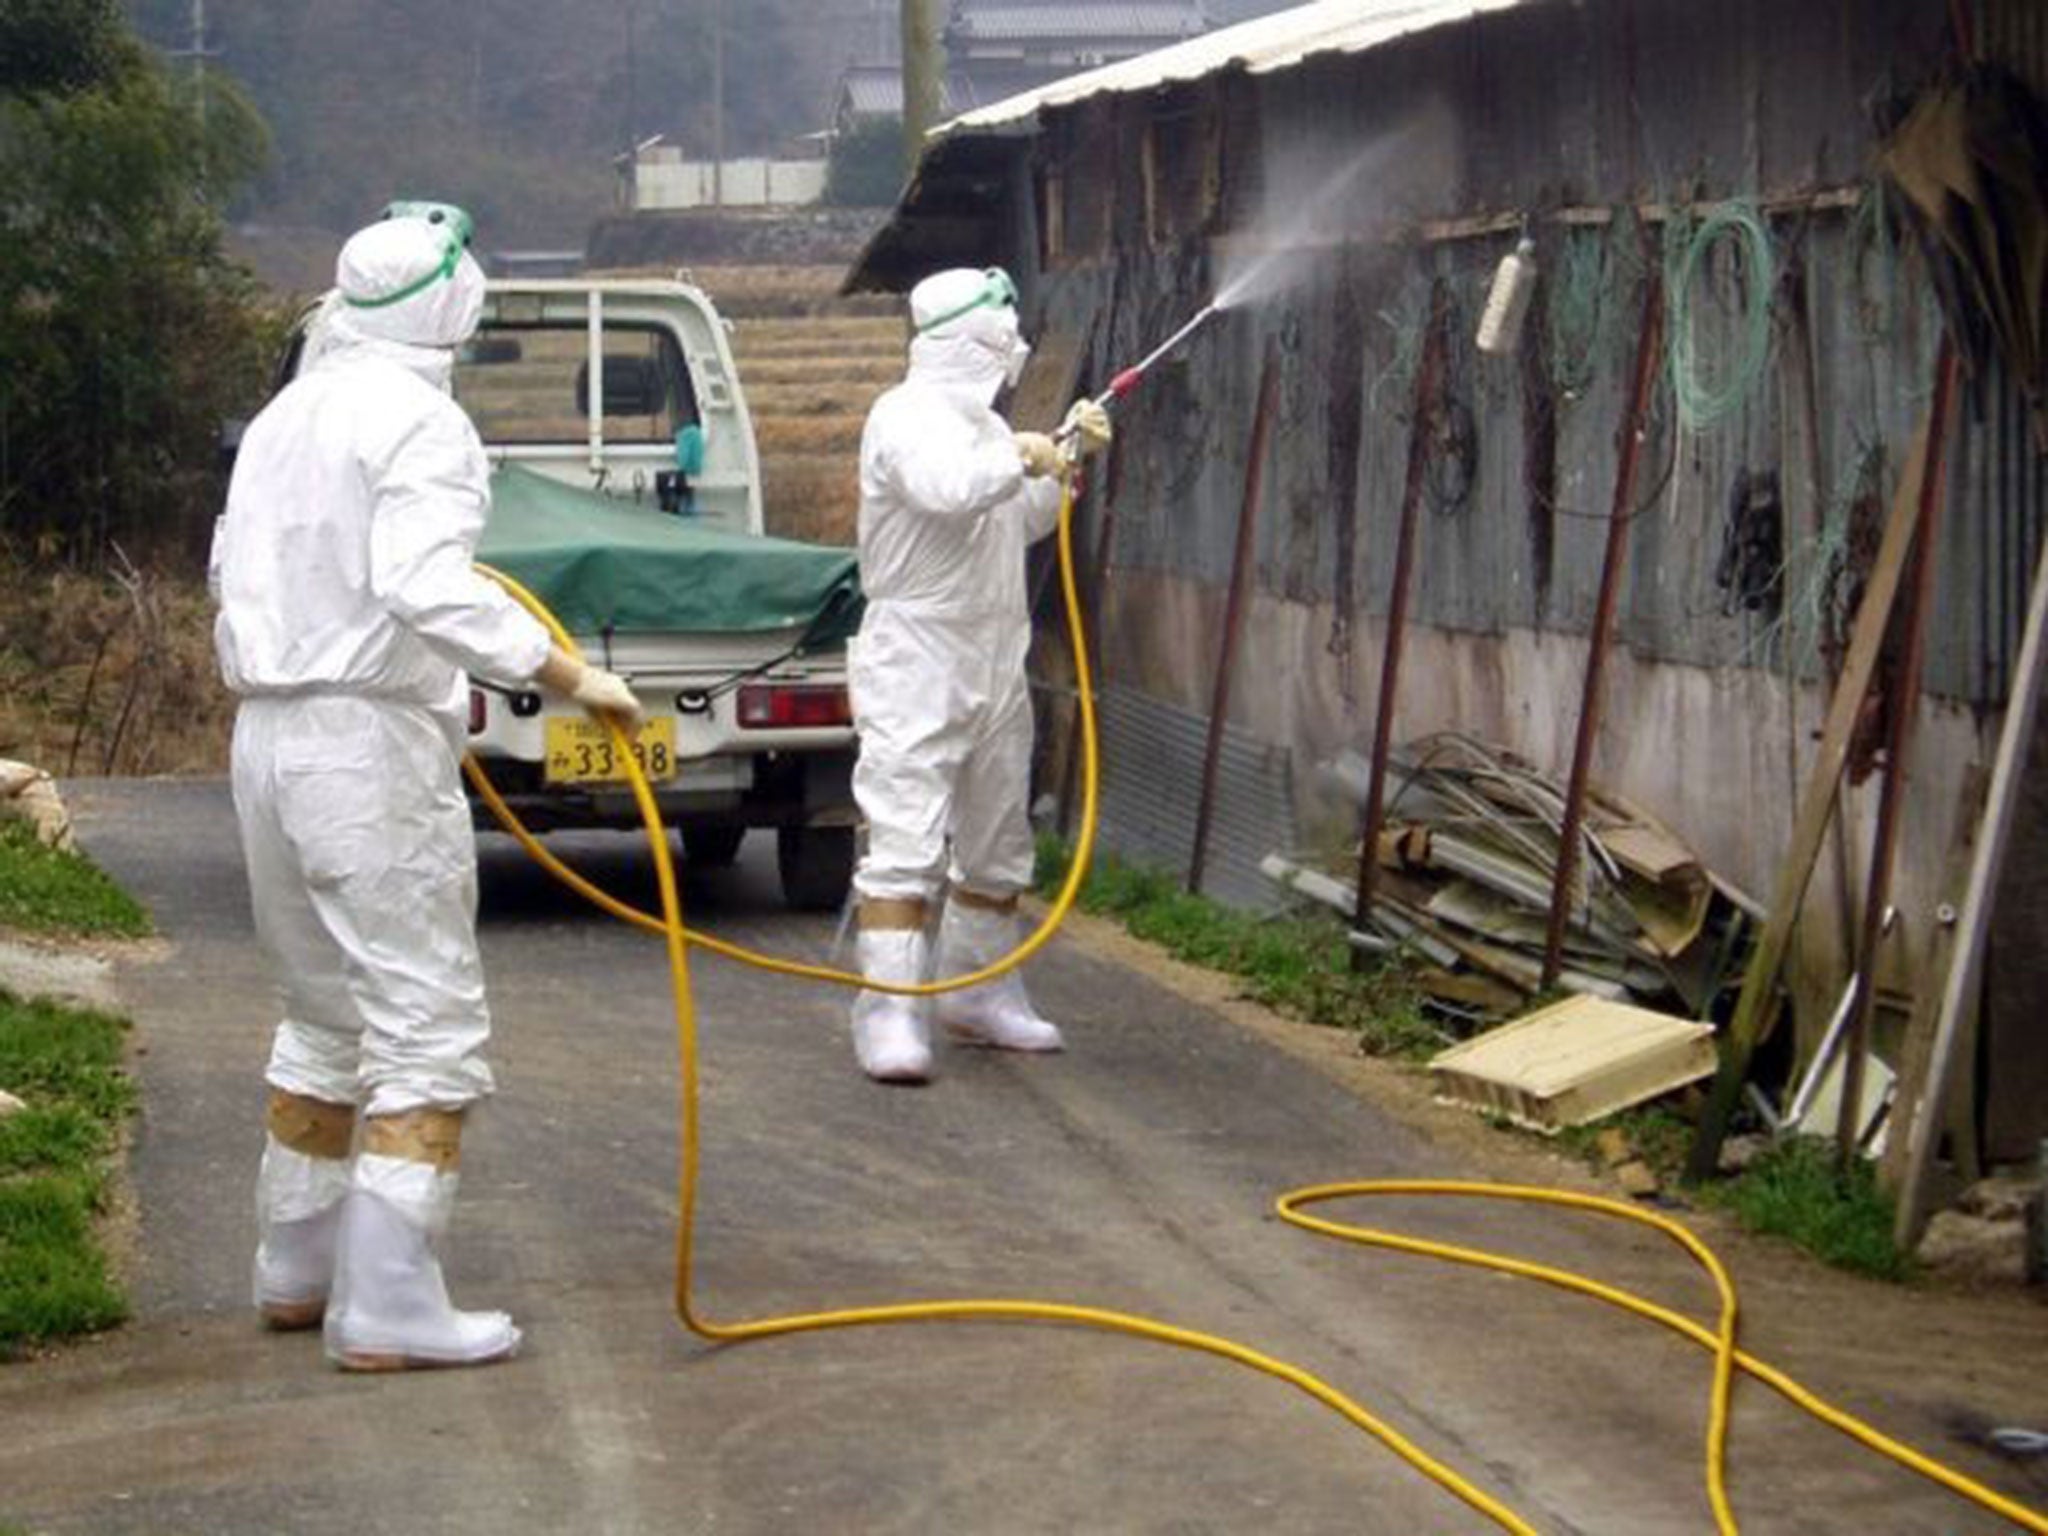 An Okayama Prefectural Government handout picture shows Japanese health experts disinfecting a chicken farm in Takahashi, Okayama Prefecture, on 28 January, 2007